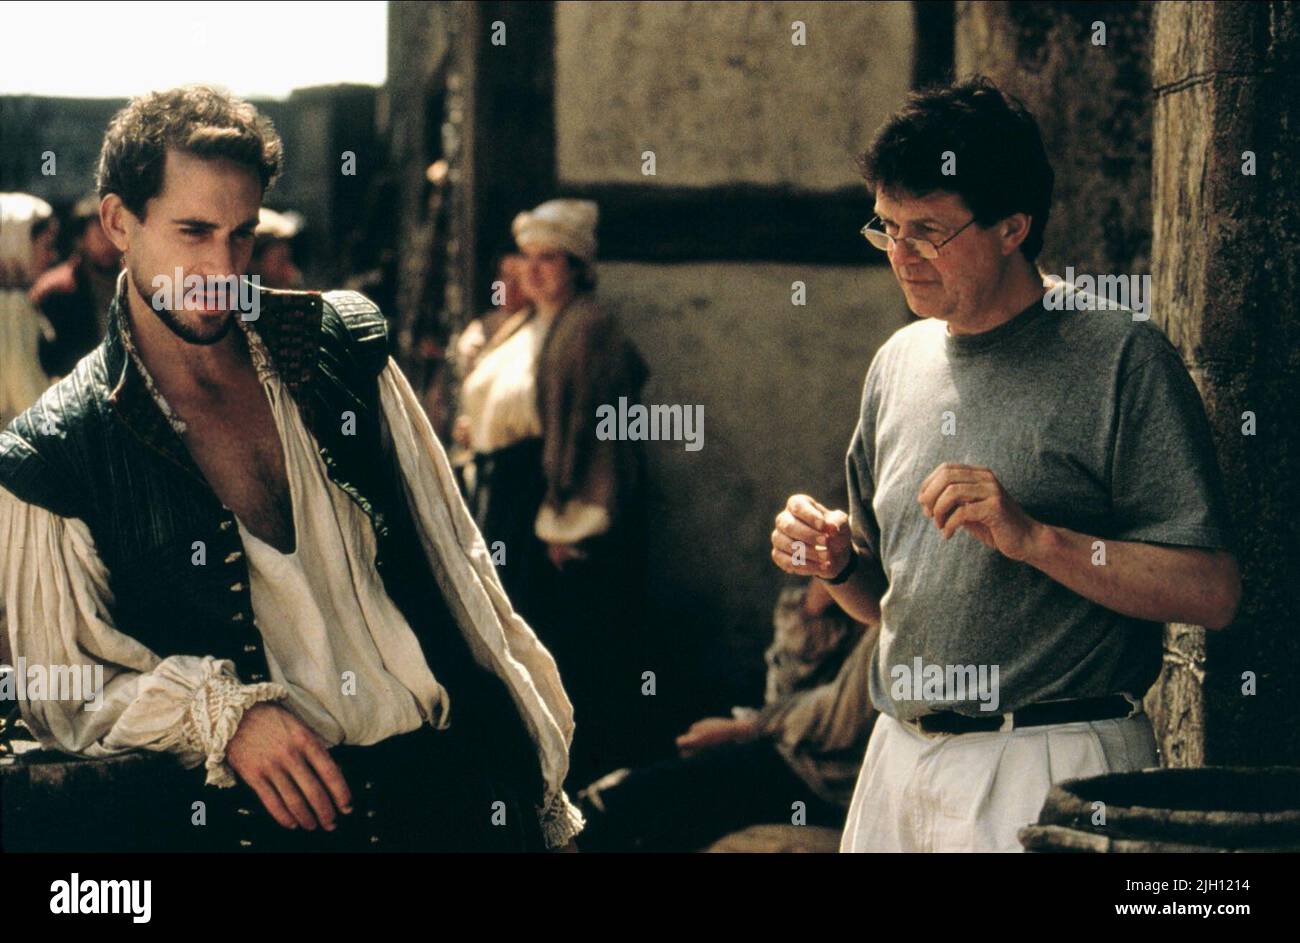 FIENNES,MADDEN, SHAKESPEARE IN AMORE, 1998 Foto Stock